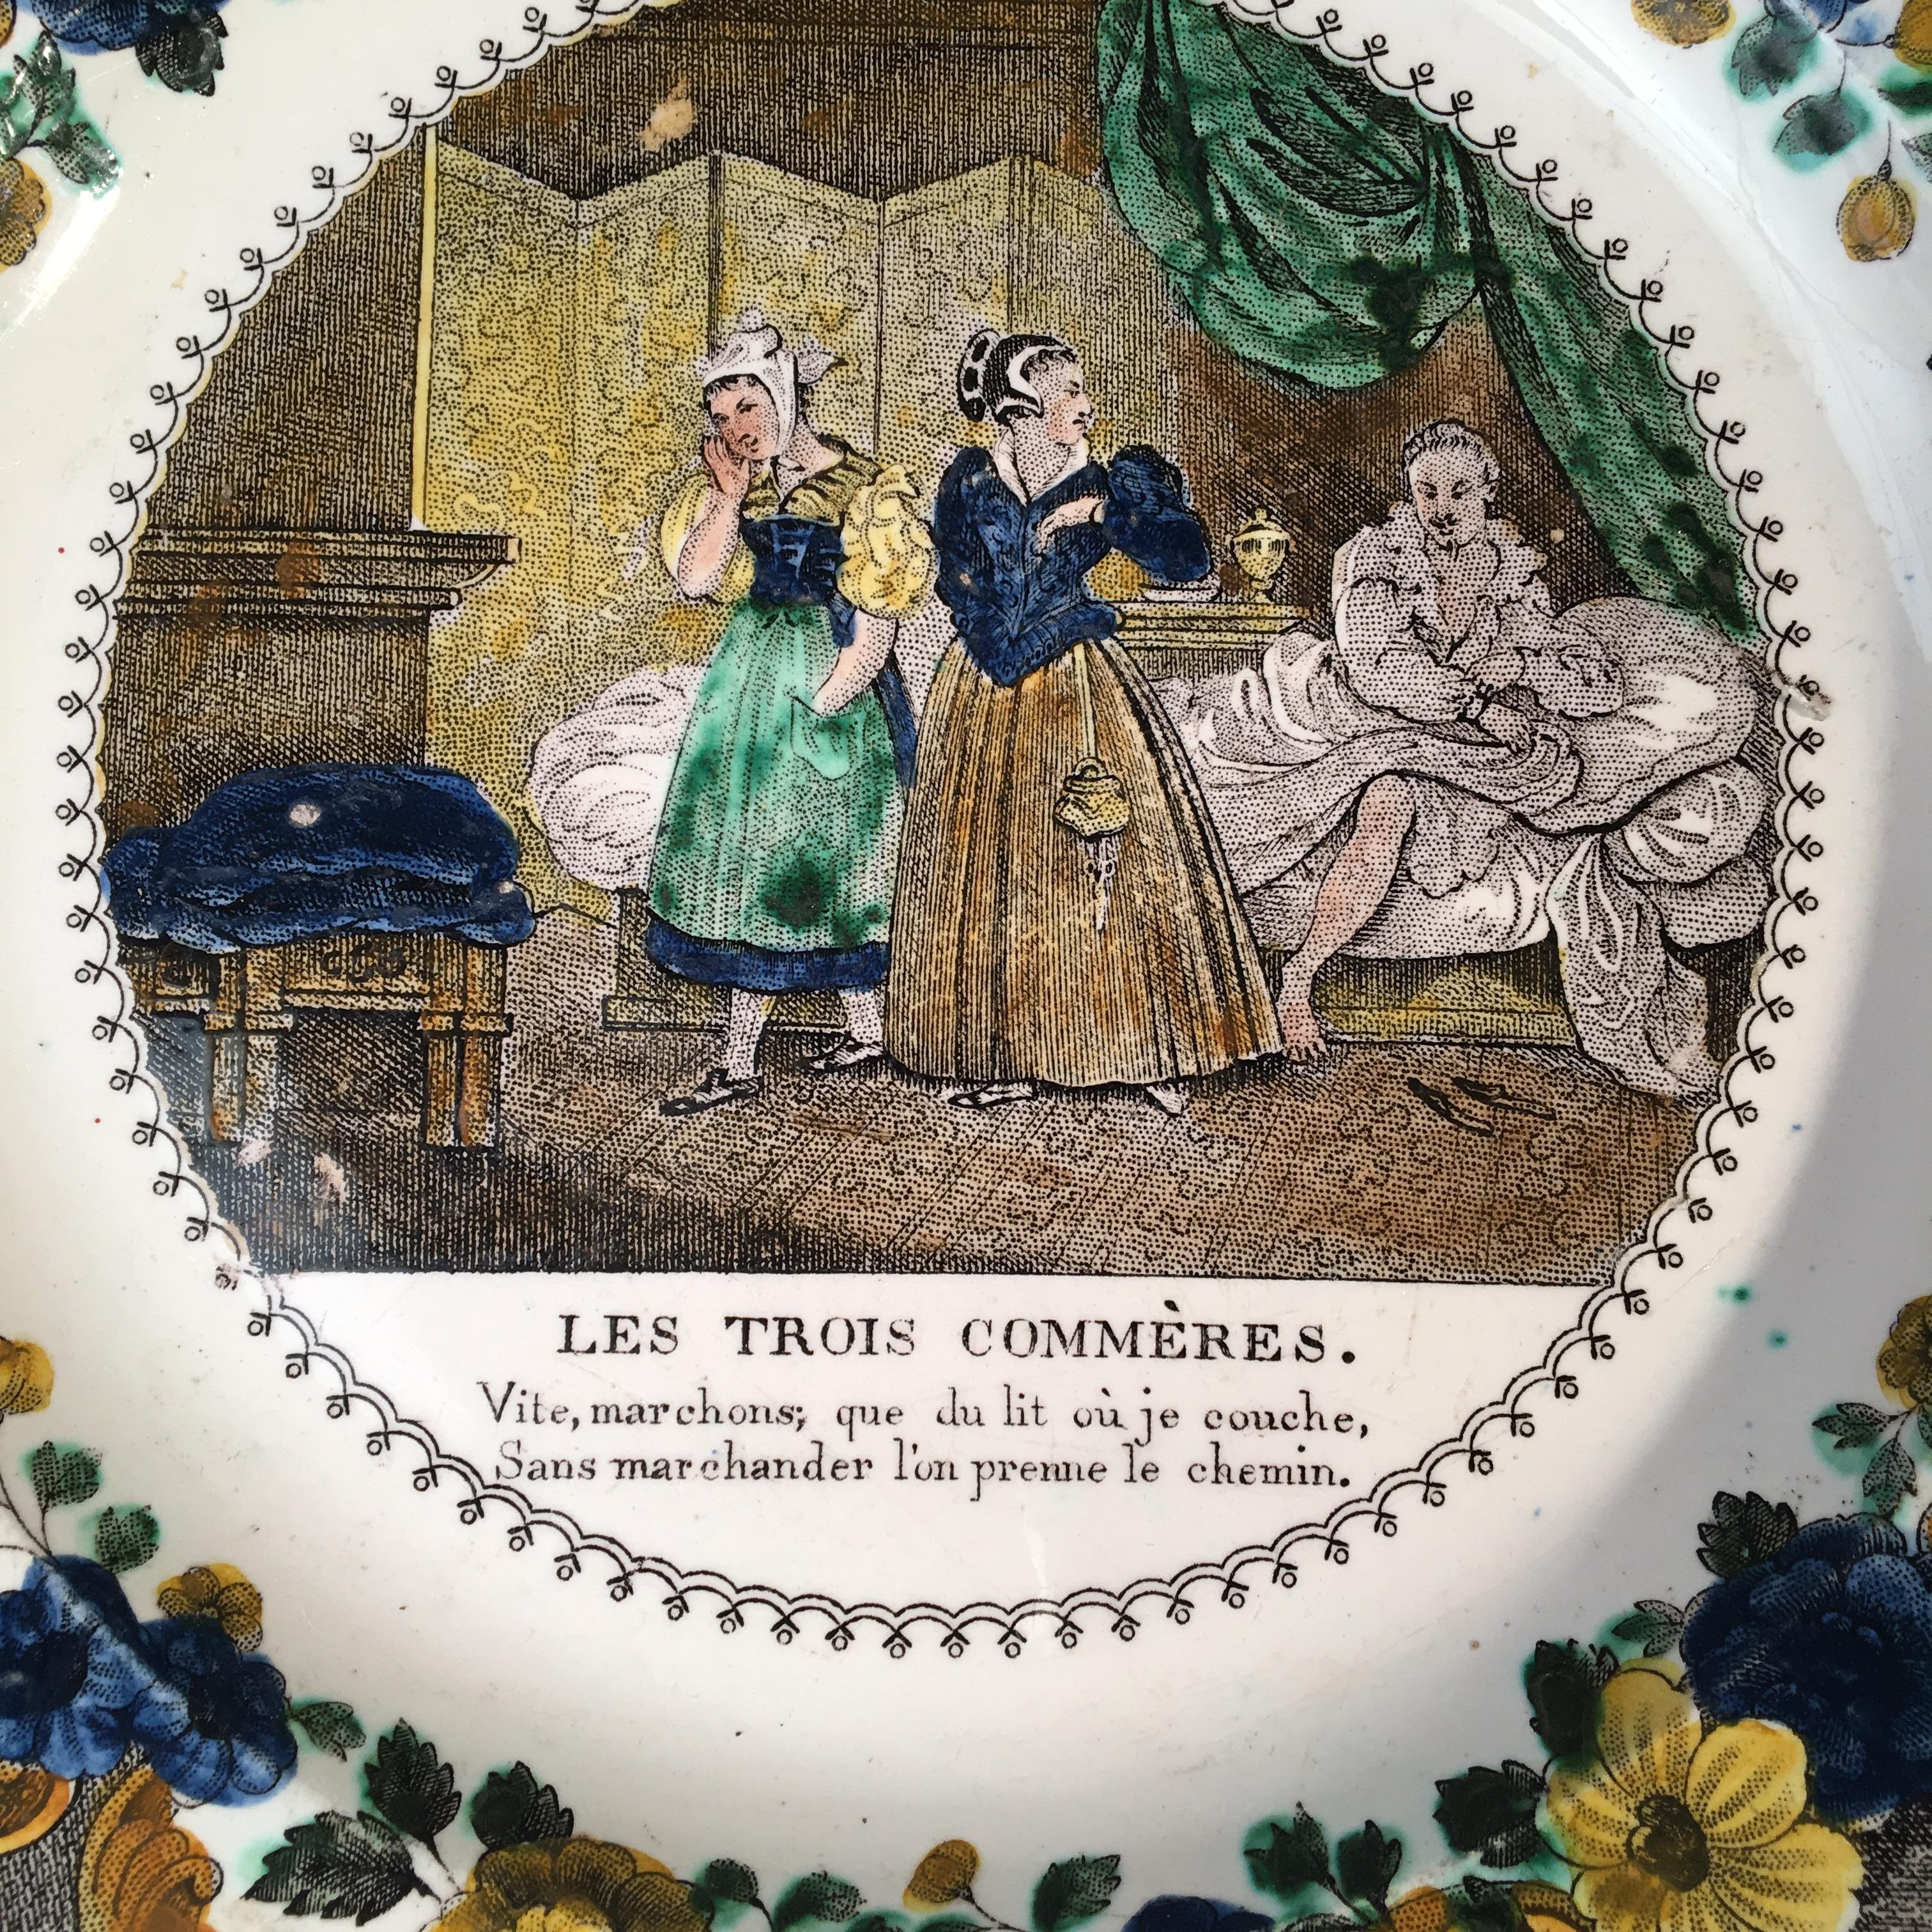 A set of 3 polychrome pictorial faience plates by Louis LeBeuf, from Montereau France, circa 1850.